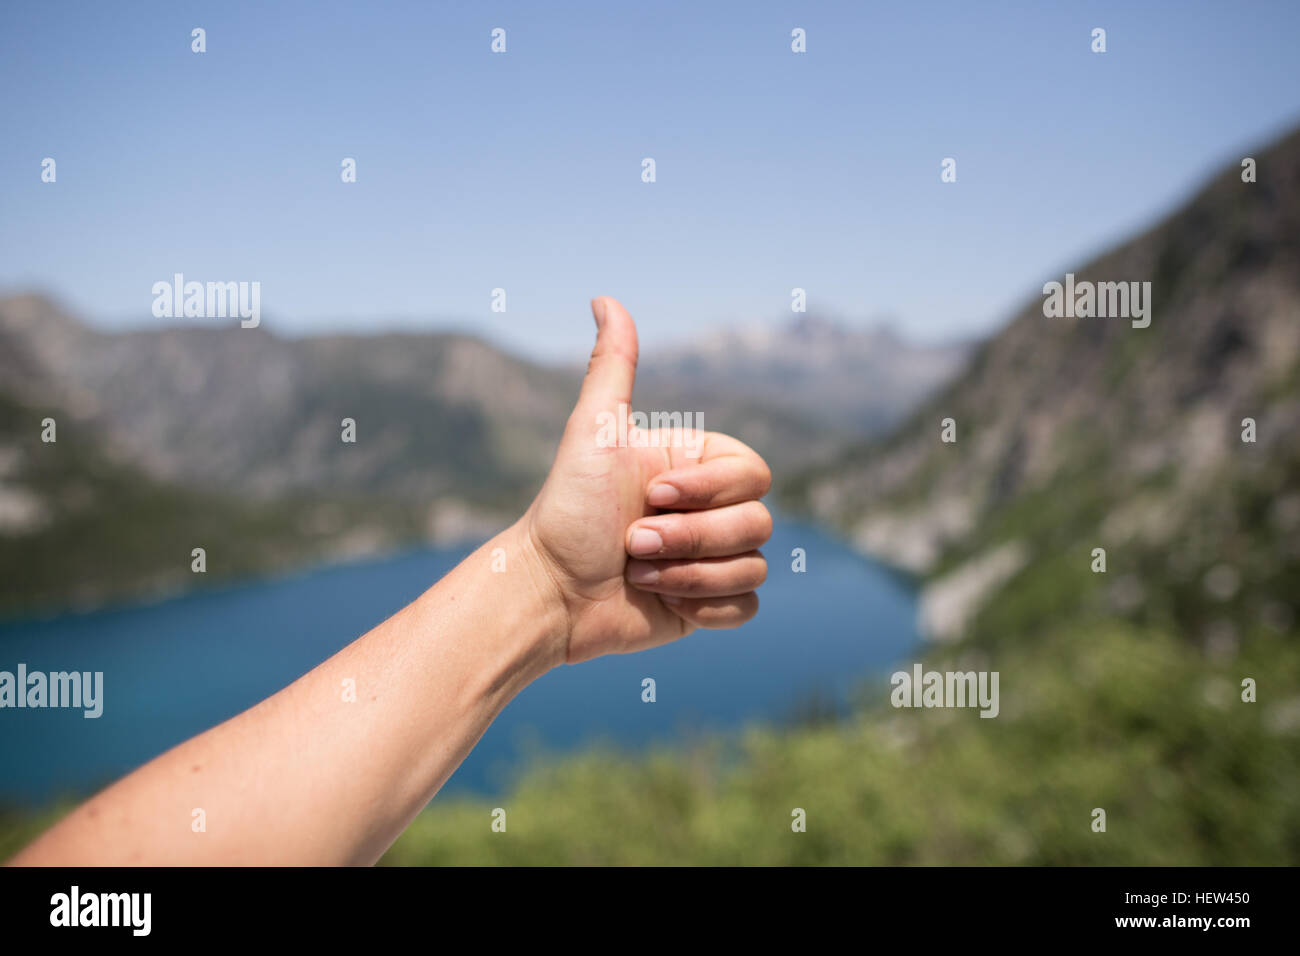 Young woman giving thumbs up, close-up, The Enchantments, Alpine Lakes Wilderness, Washington, USA Stock Photo